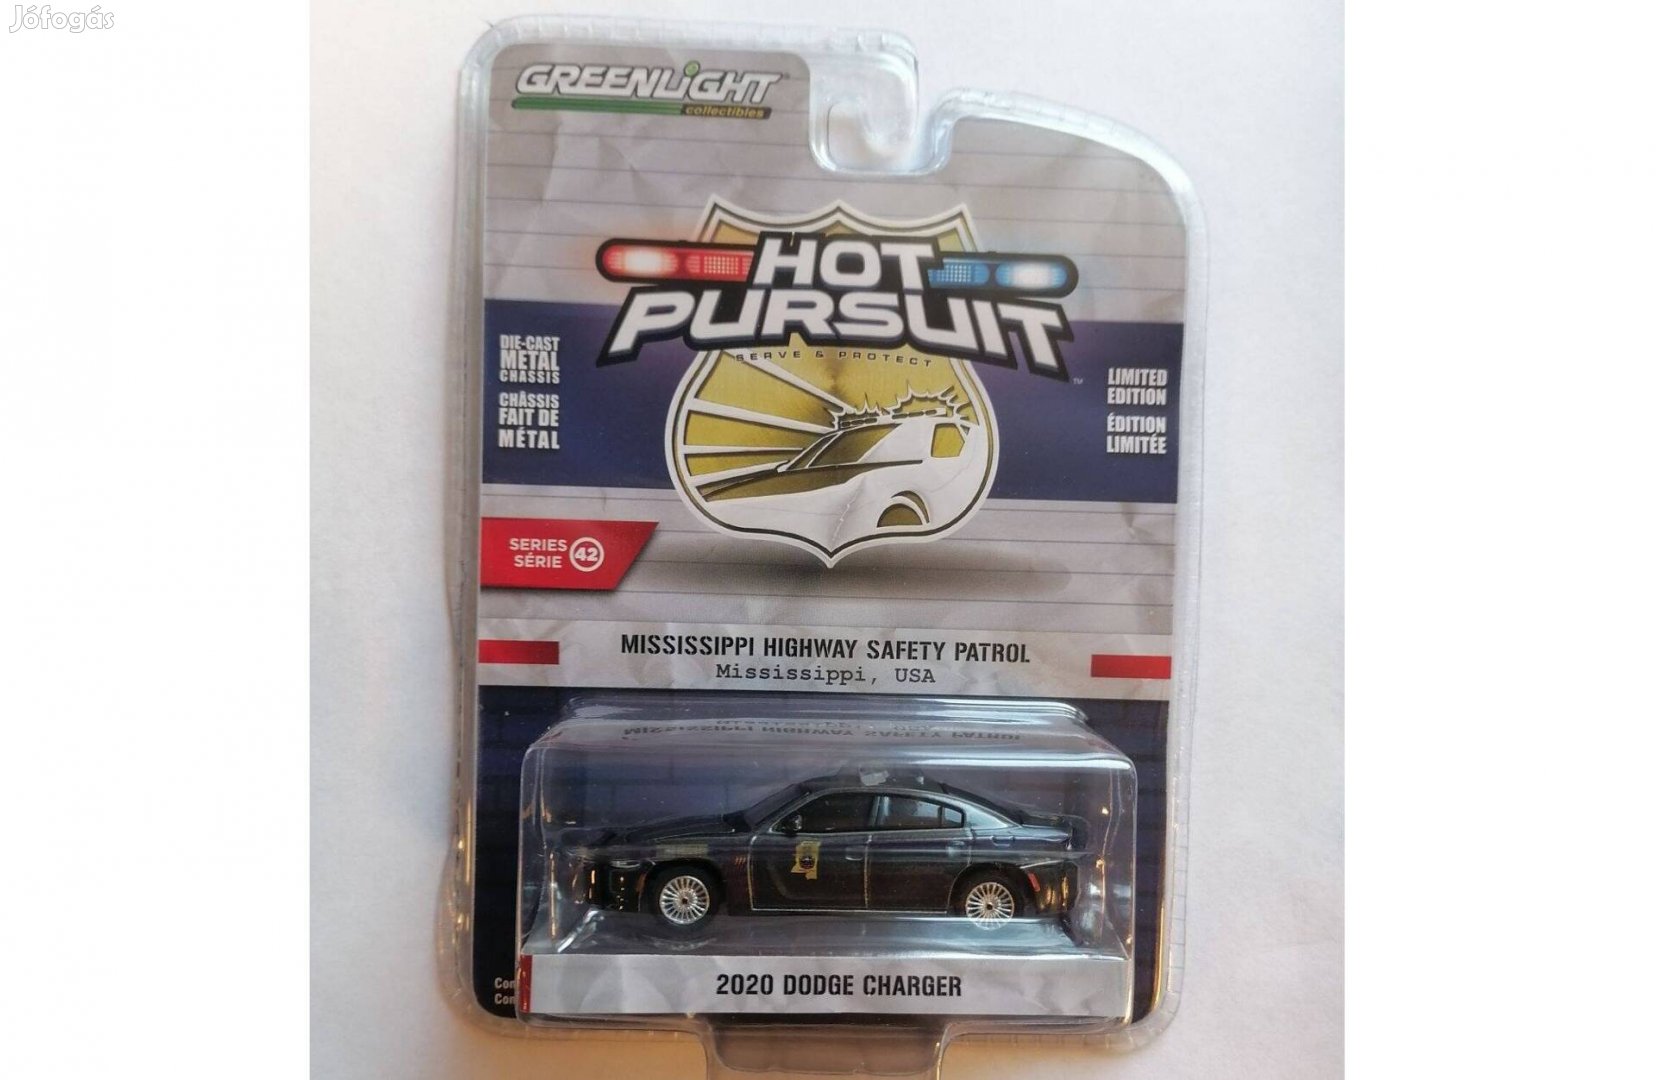 Greenlight hot pursuit series 42 2020 Dodge Charger - Mississippi High